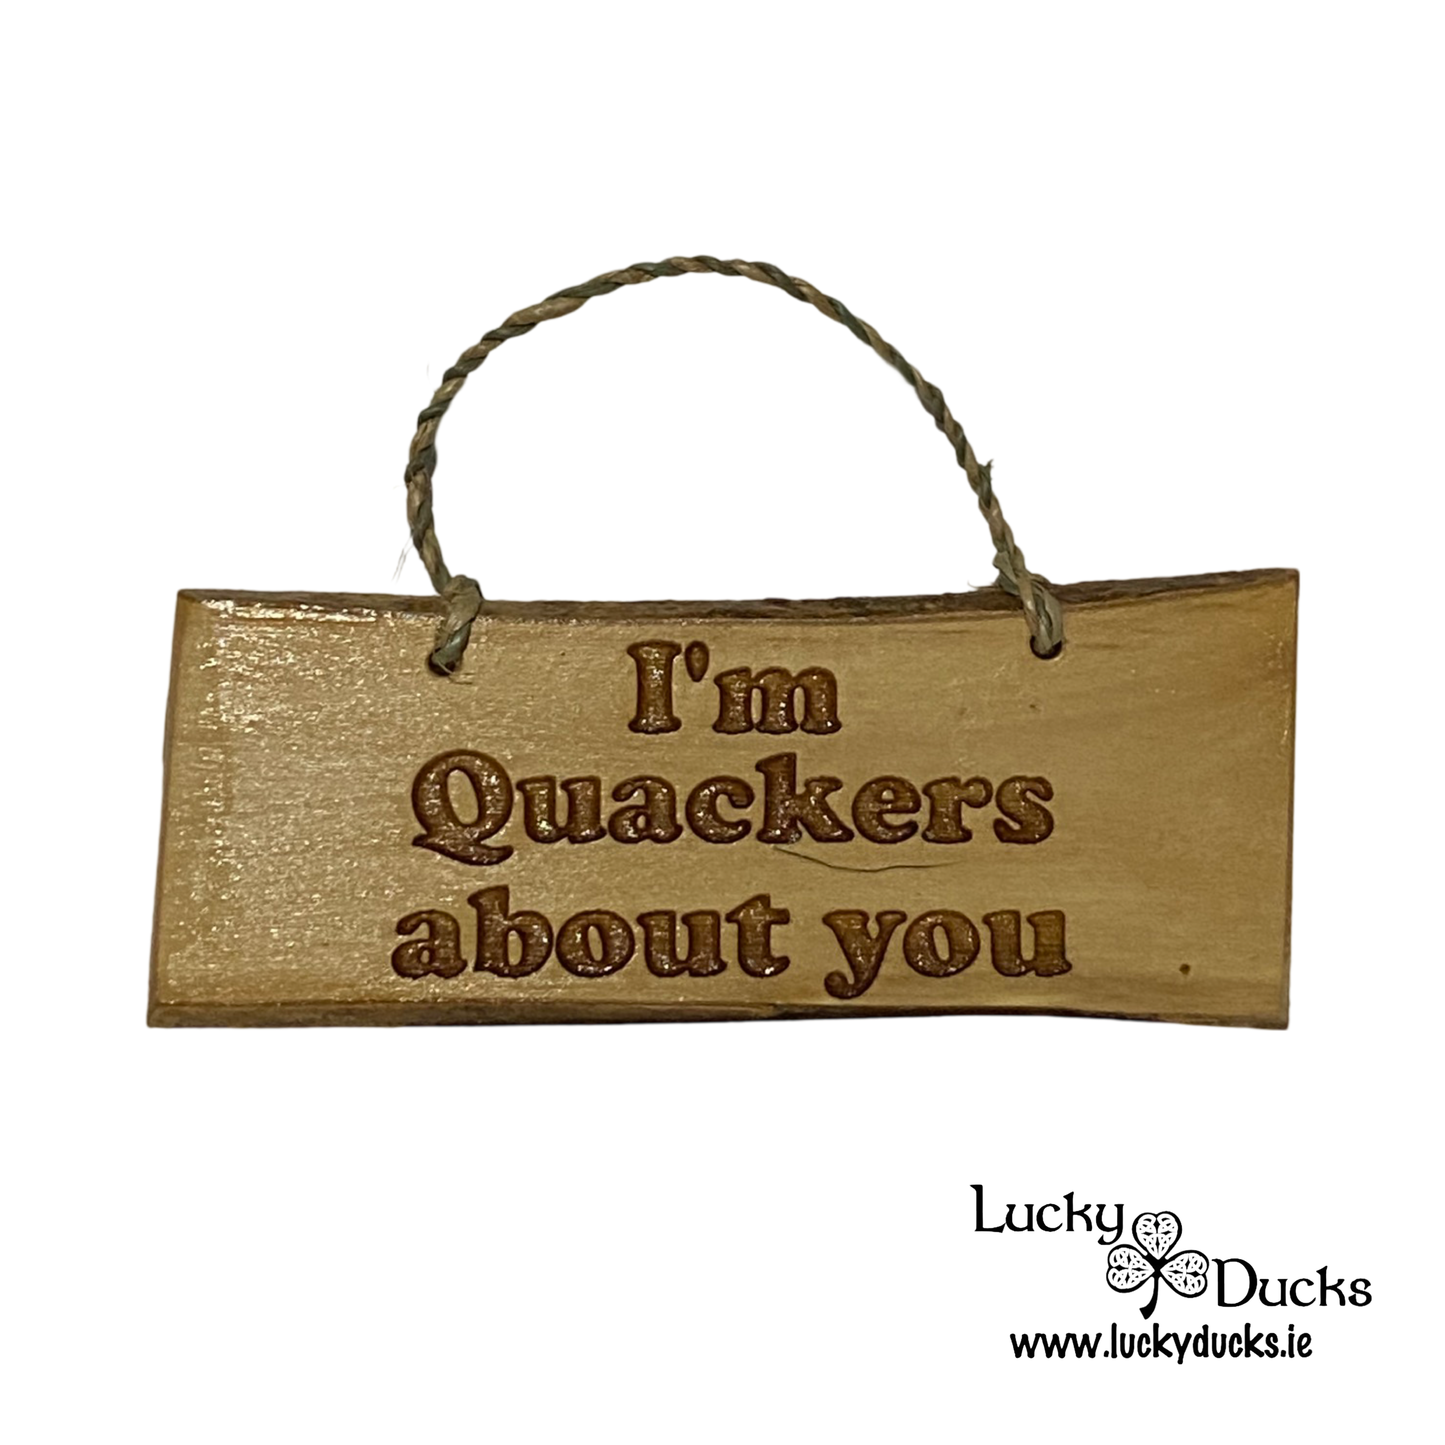 "I'm Quackers About You" Funny Duck sign